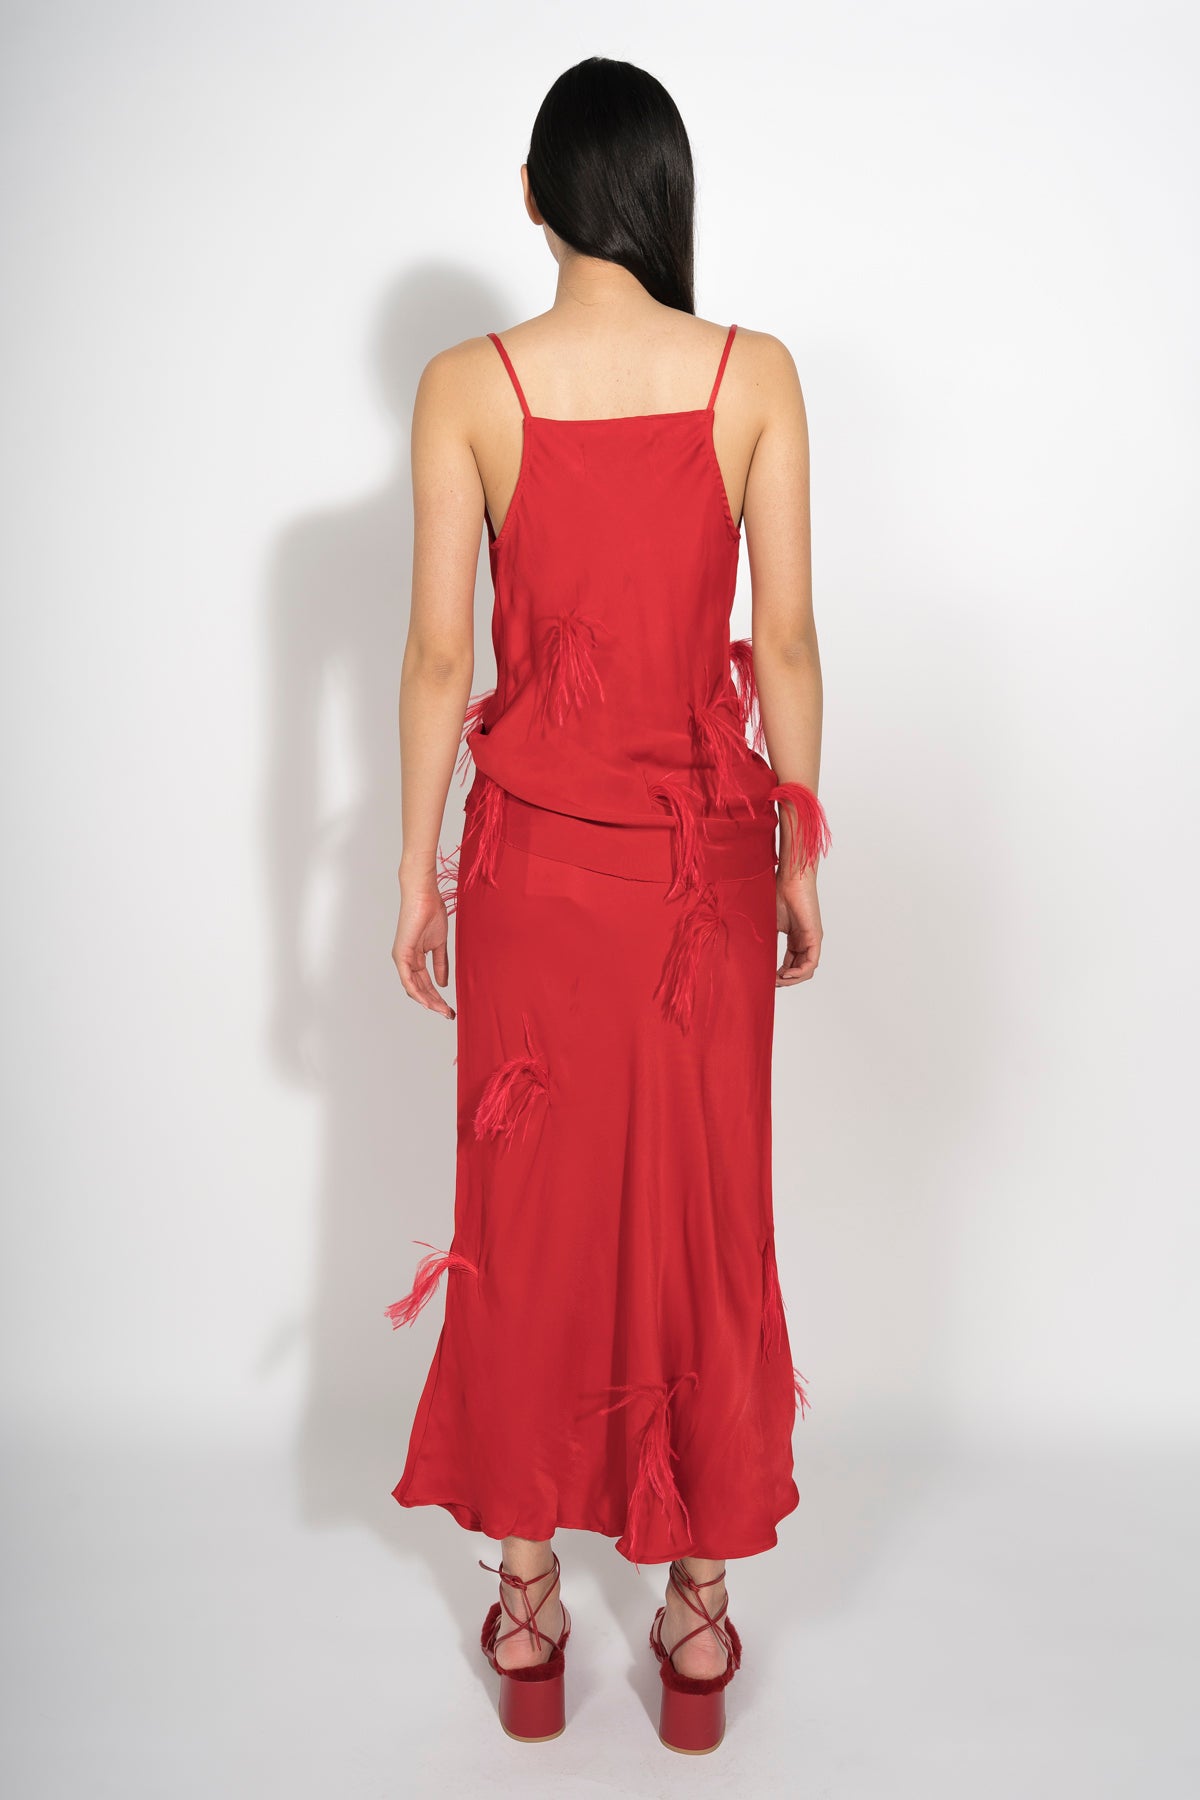 RED SLIP TOP WITH FEATHERS MARQUES ALMEIDA